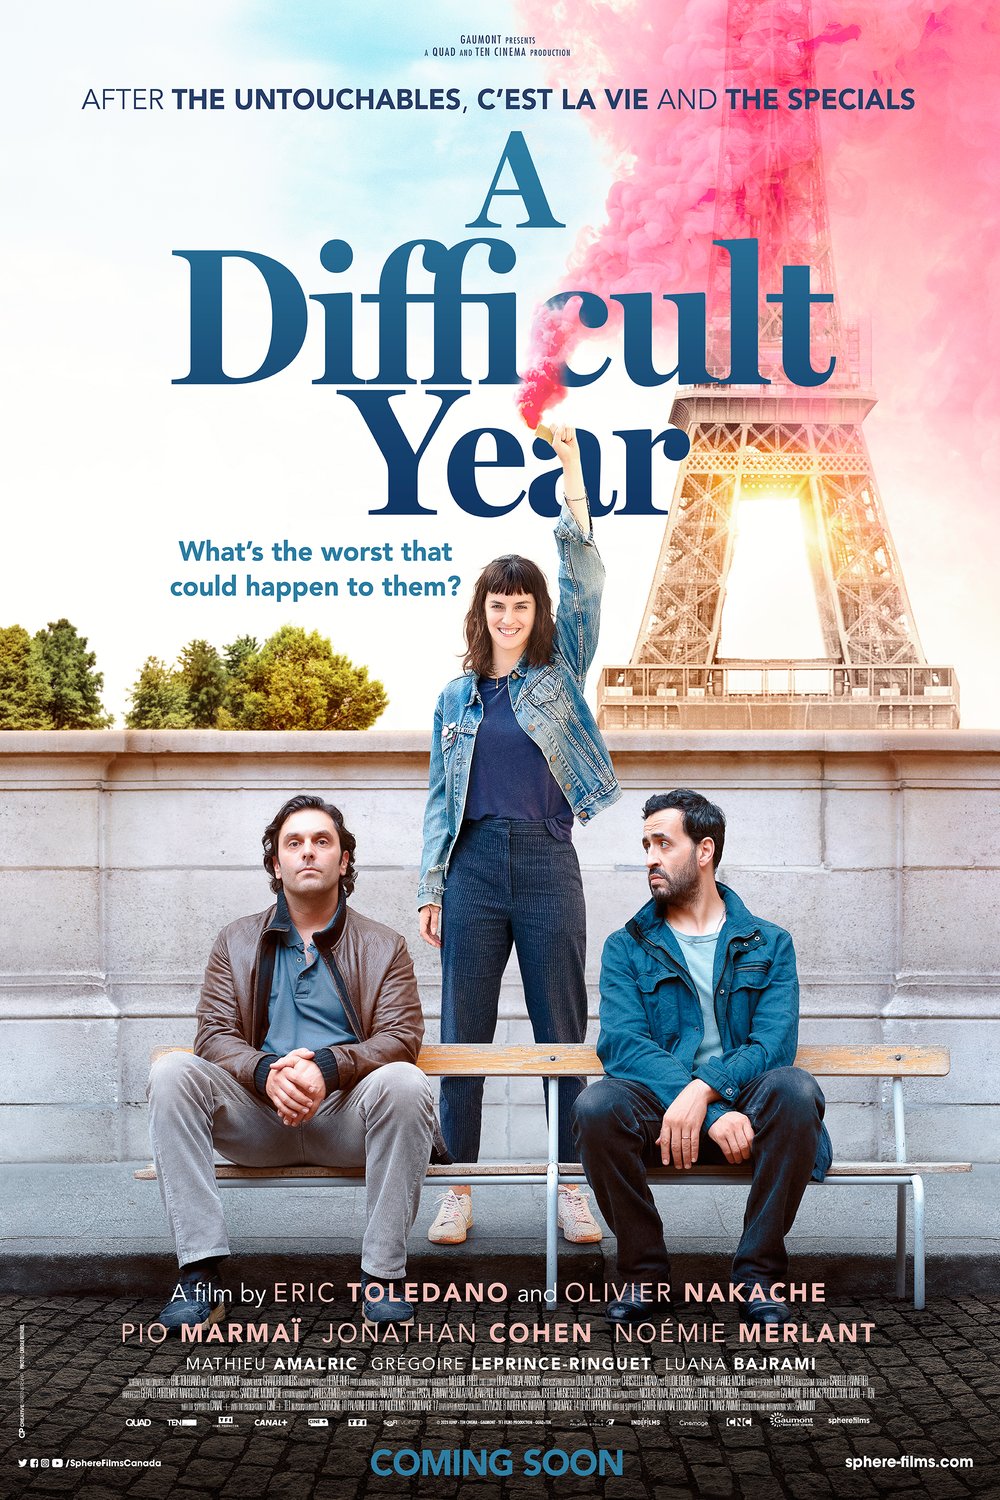 Poster of the movie A Difficult Year